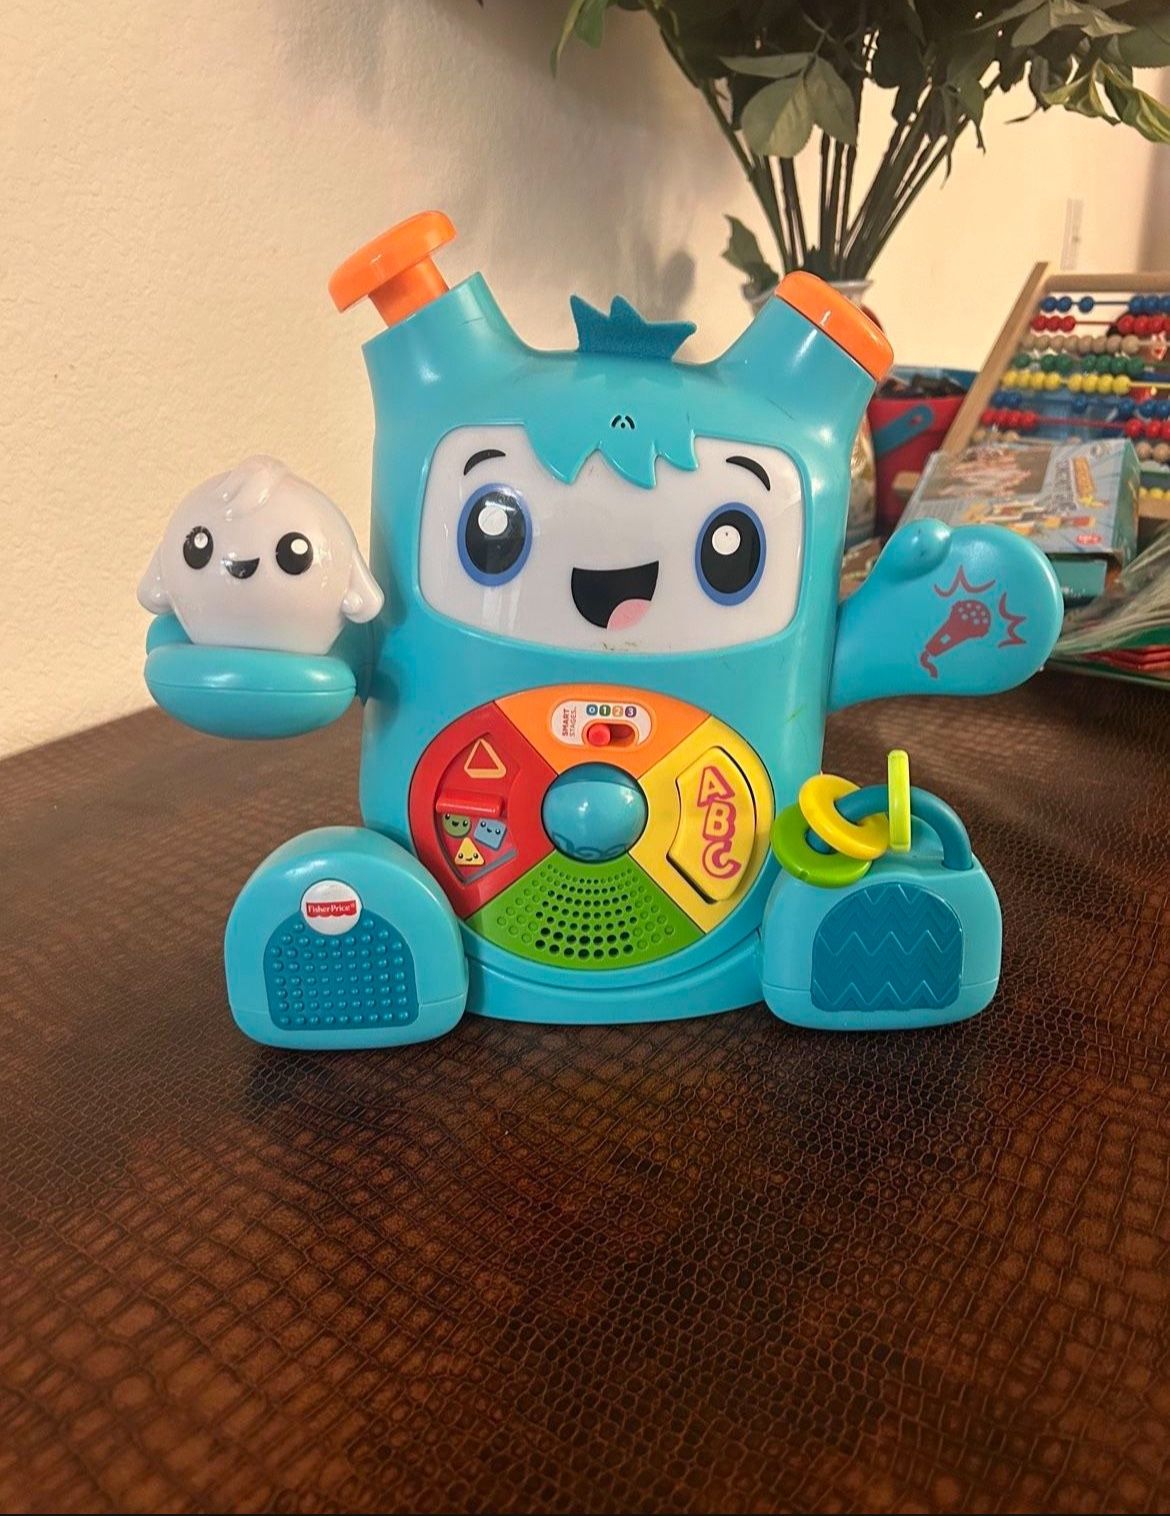 Dance & Groove Rockit Baby Electronic Learning Toy with Music and Lights